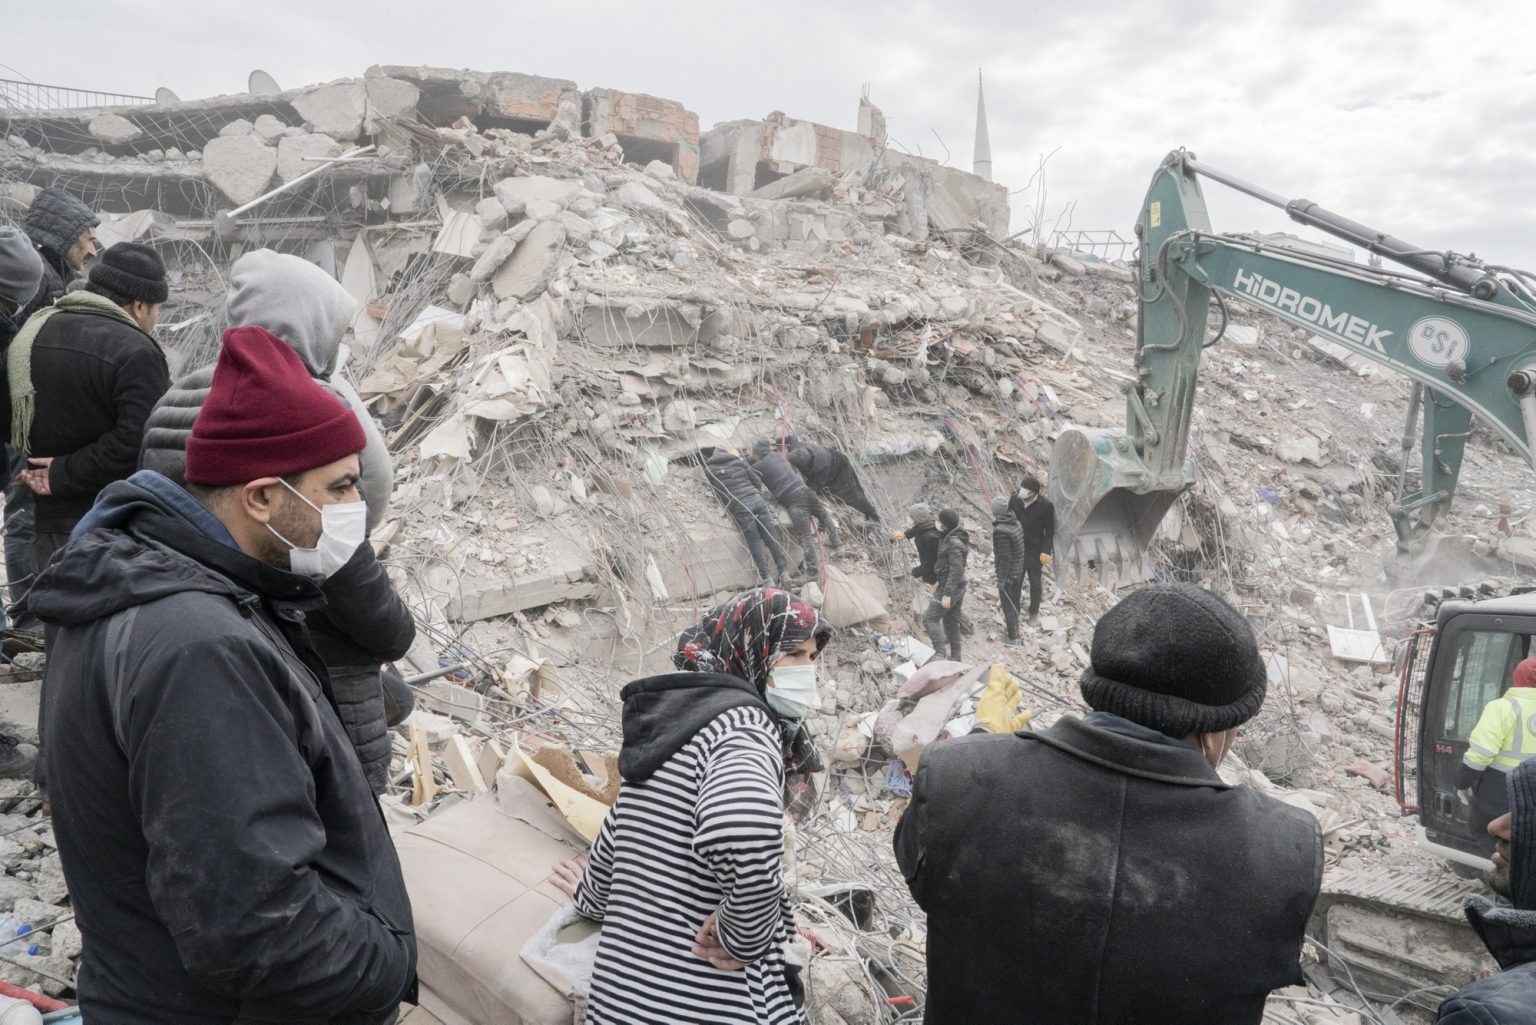 Kahramanmaras¸, Turkey, February 2023 - The aftermath of the earthquake that hit southern Turkey and northern Syria.     A collapsed building in the center of Kahramanmaras¸. ><
Kahramanmaras¸, Turchia, febbraio 2023  Le conseguenze del terremoto che ha colpito la Turchia del Sud e la Siria del nord.